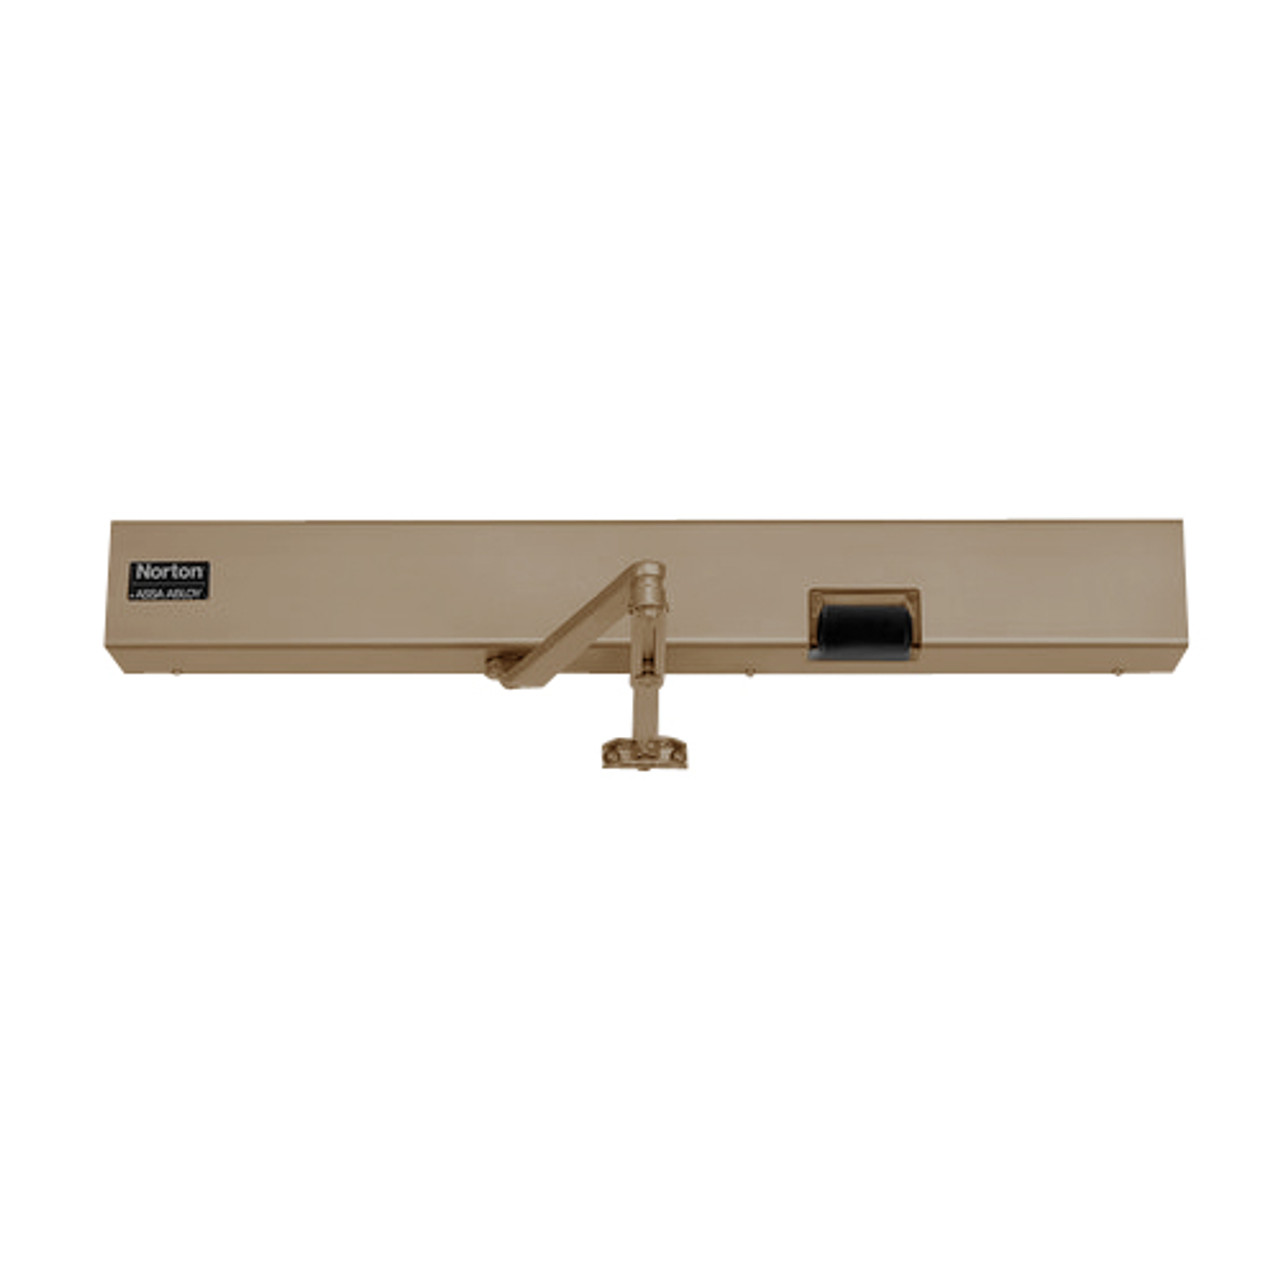 7122SZ-RH-120VAC-691 Norton 7100SZ Series Safe Zone Multi-Point Closer/Holder with Motion Sensor and Push Side Double Lever 11 inch Main Arm in Dull Bronze Finish